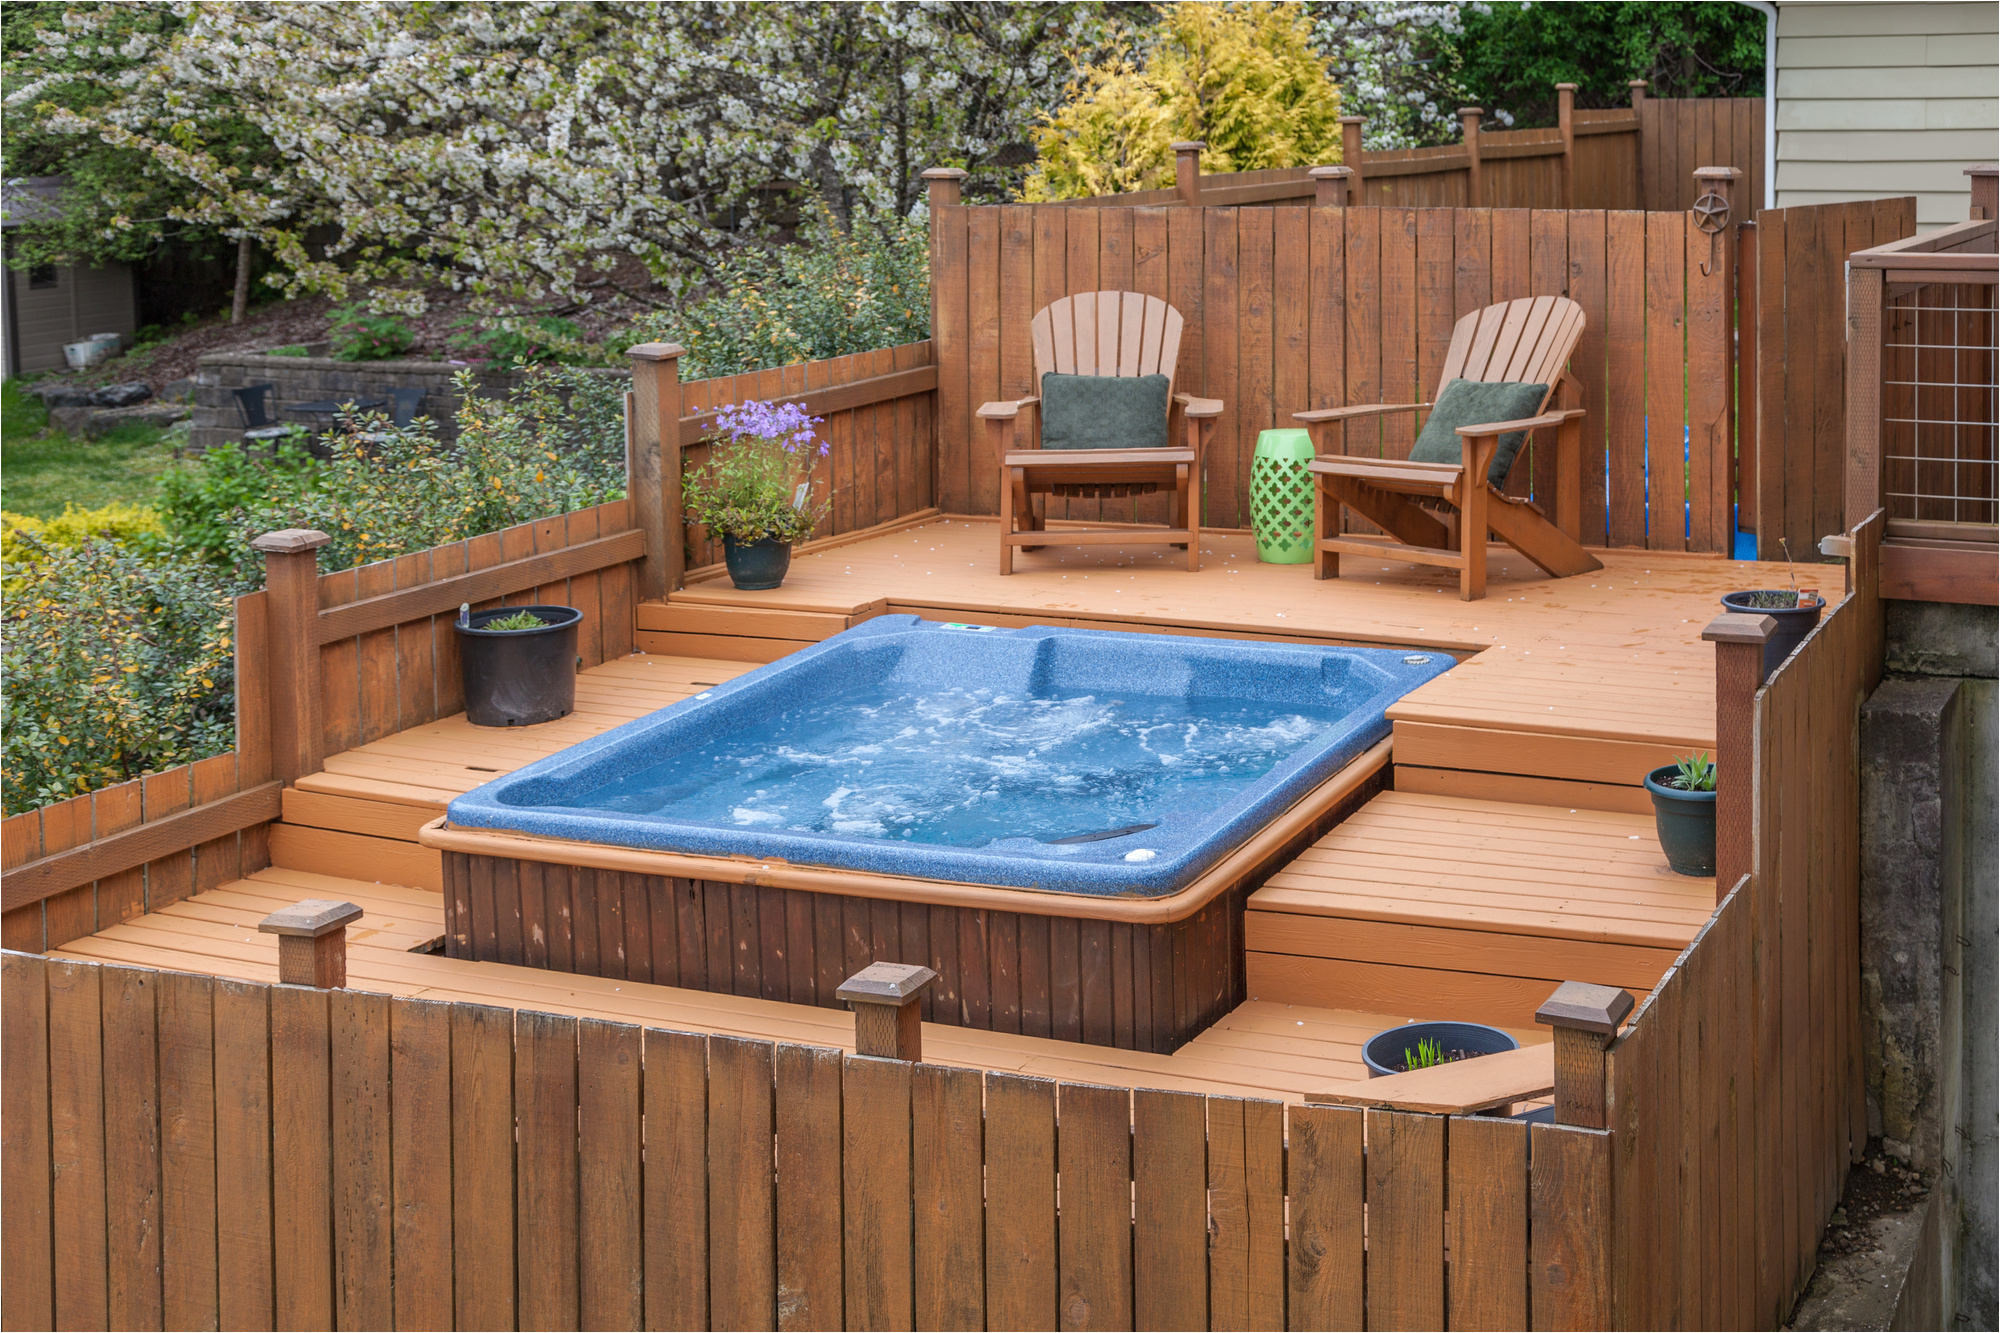 Outdoor Jacuzzi Bathtub Installing An Outdoor Hot Tub Considerations